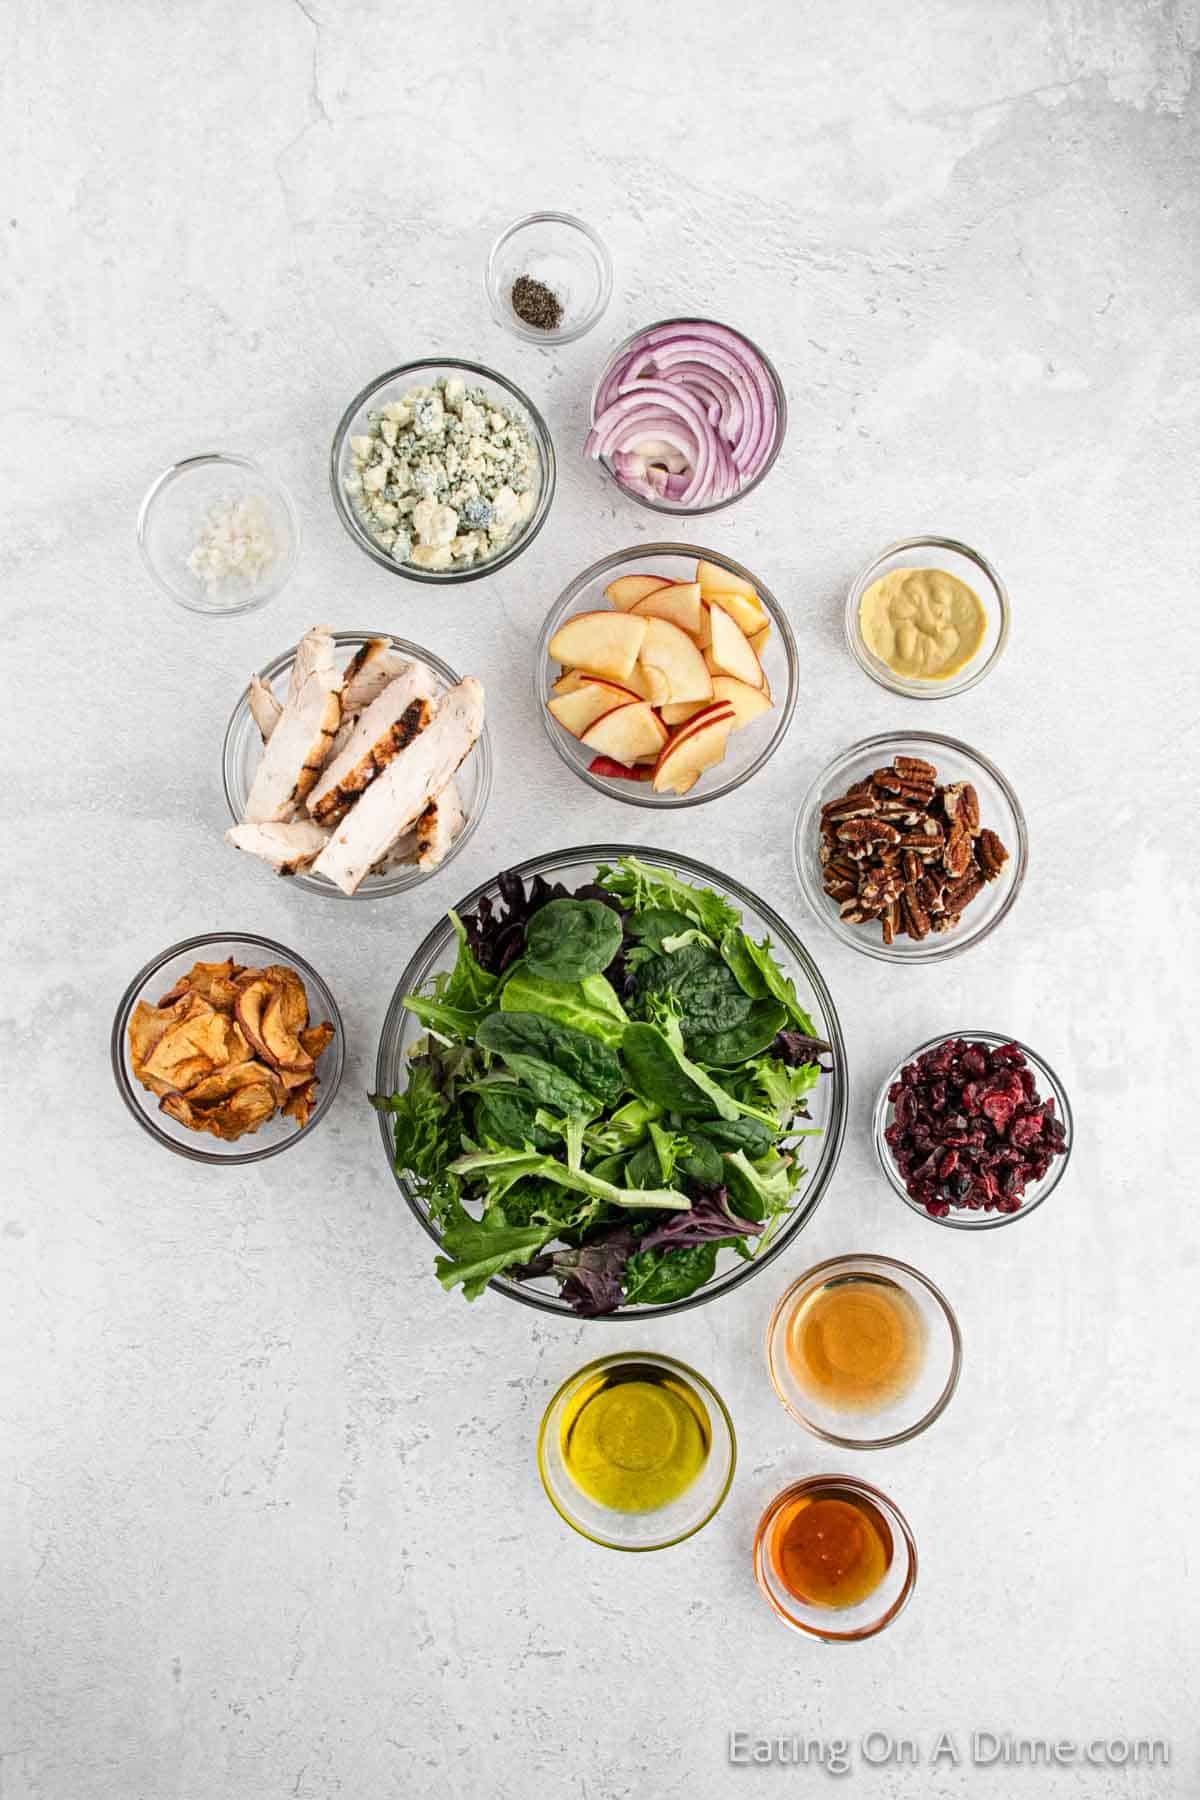 Ingredients - mixed salad greens, Fuji apples, red onion, dried cranberries, gorgonzola cheese crumbles, pecans, apple chips, grilled chicken, apple cider vinegar, olive oil, honey, Dijon mustard, shallot, salt, pepper